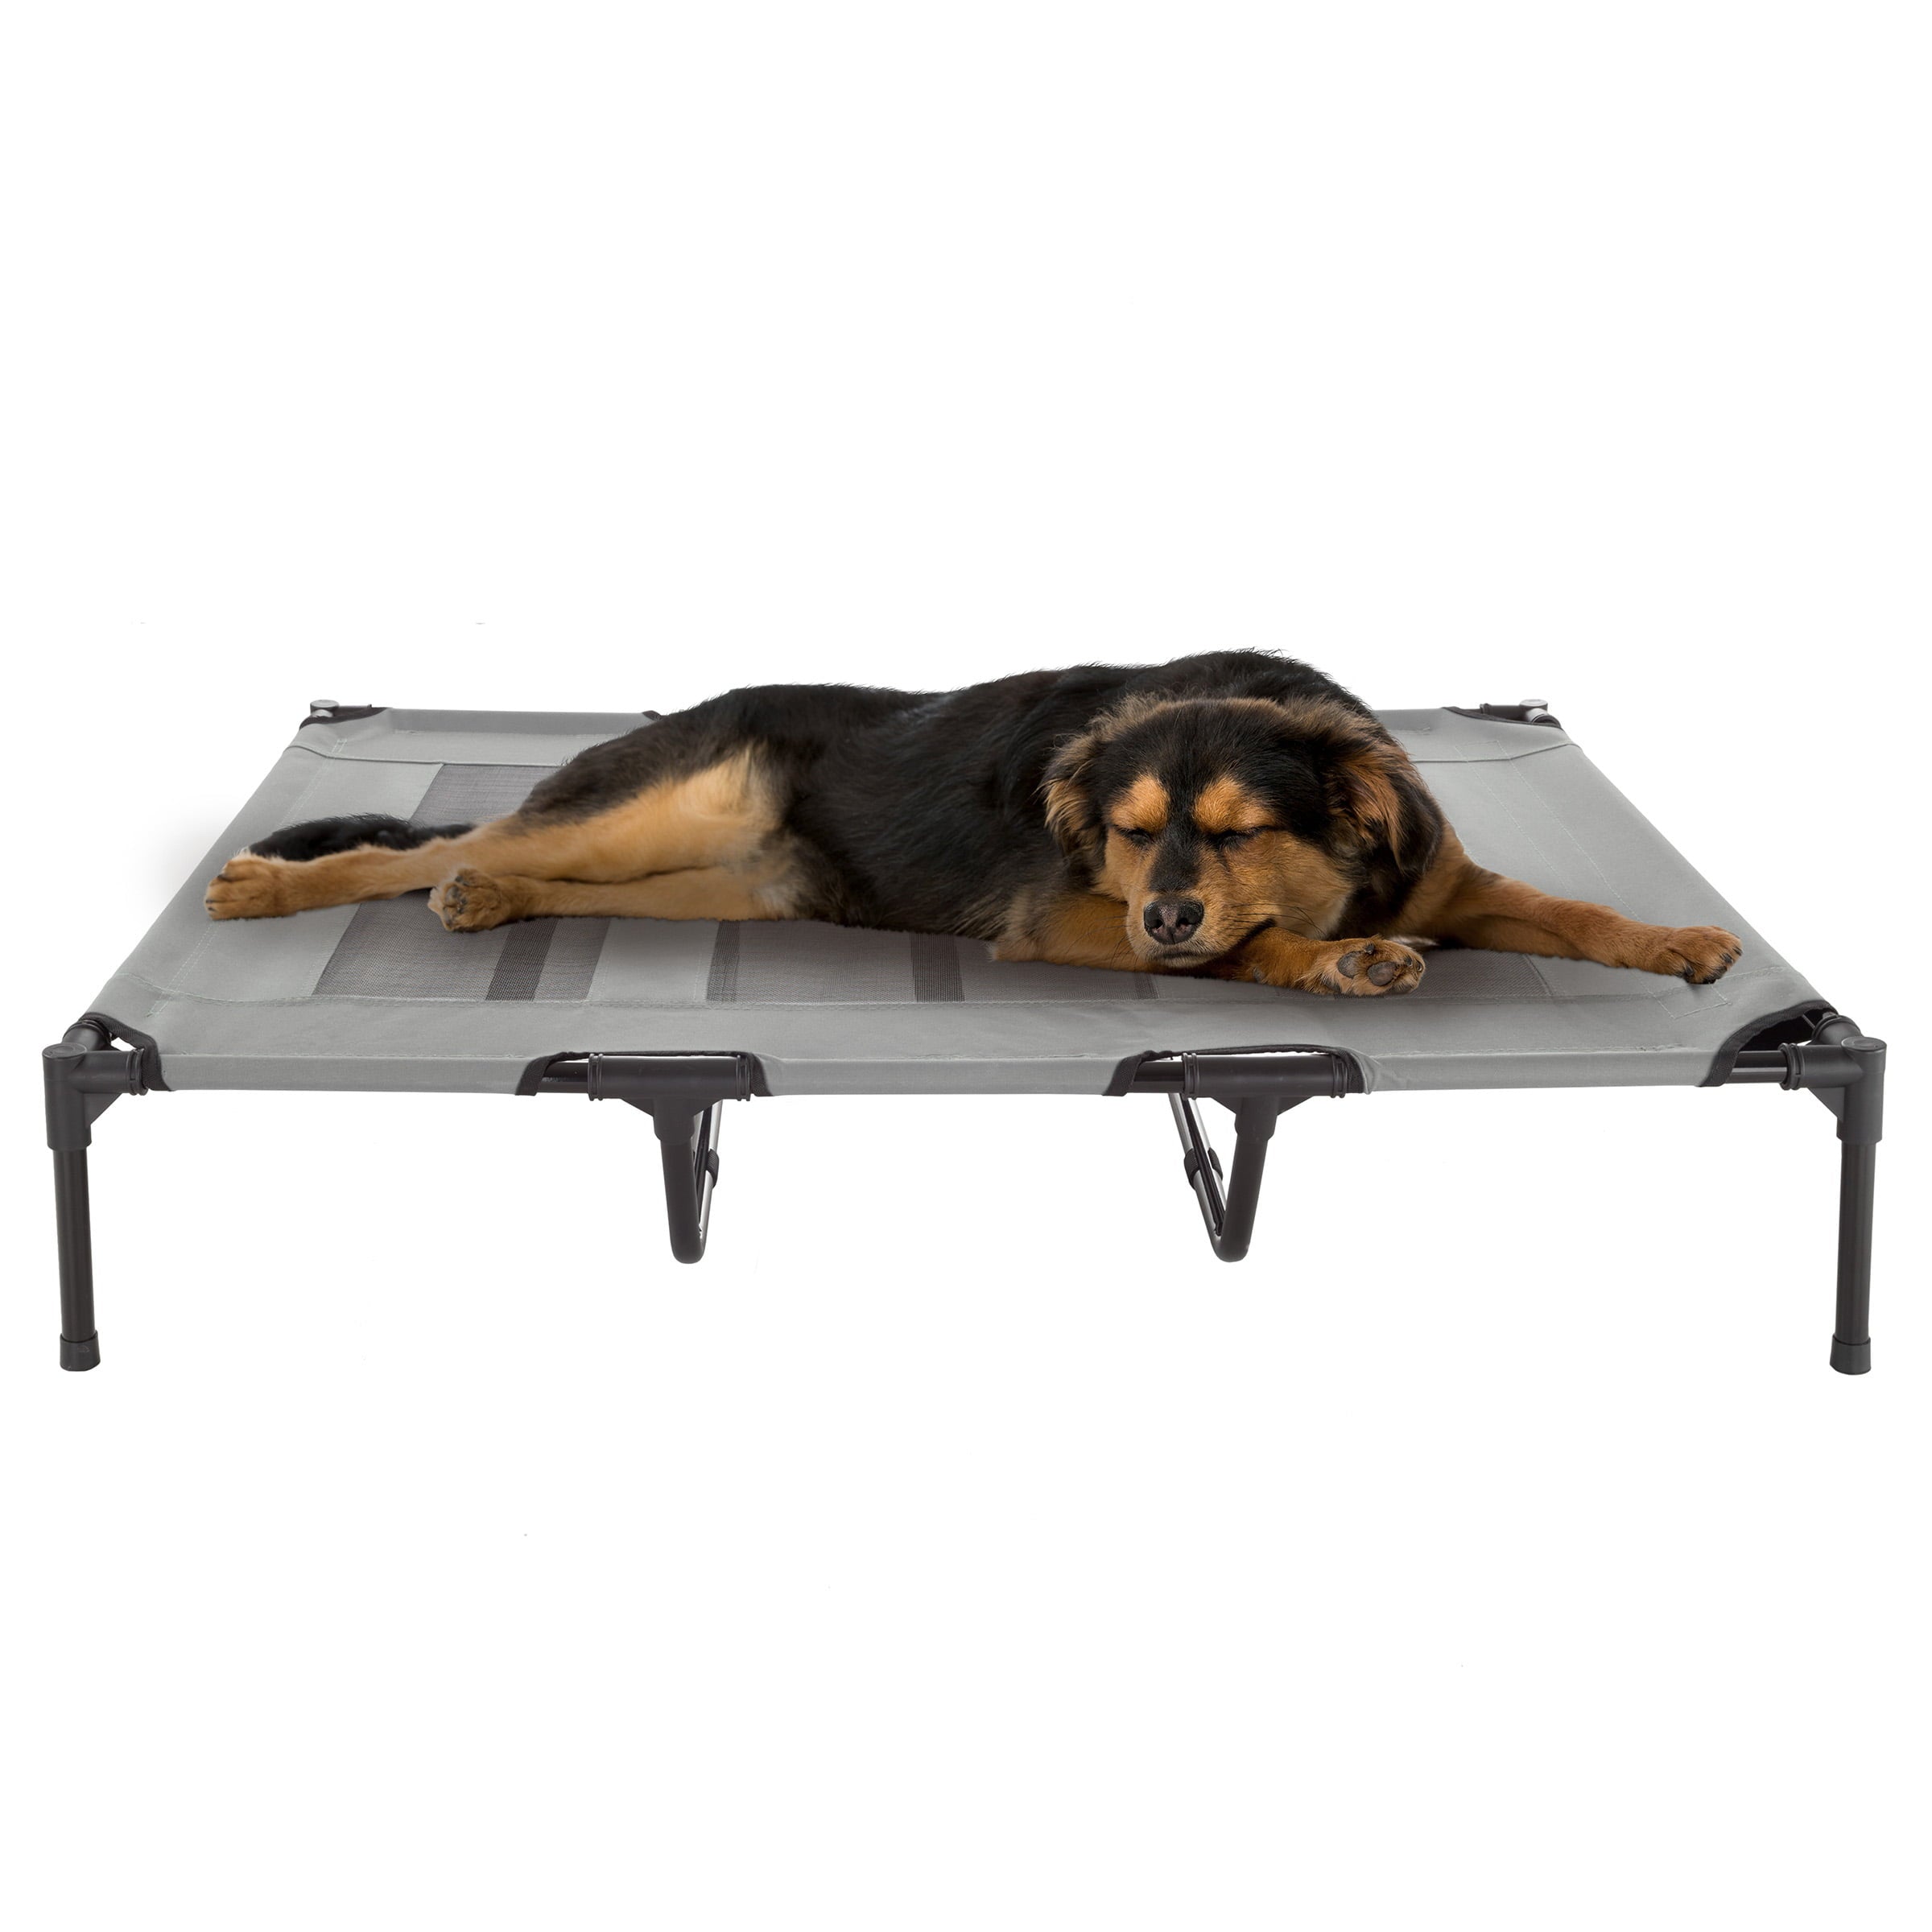 Elevated Dog Bed - 48x35.5-Inch Portable Pet Bed with Non-Slip Feet - Indoor/Outdoor Dog Cot or Puppy Bed for Pets up to 110lbs by PETMAKER (Gray)